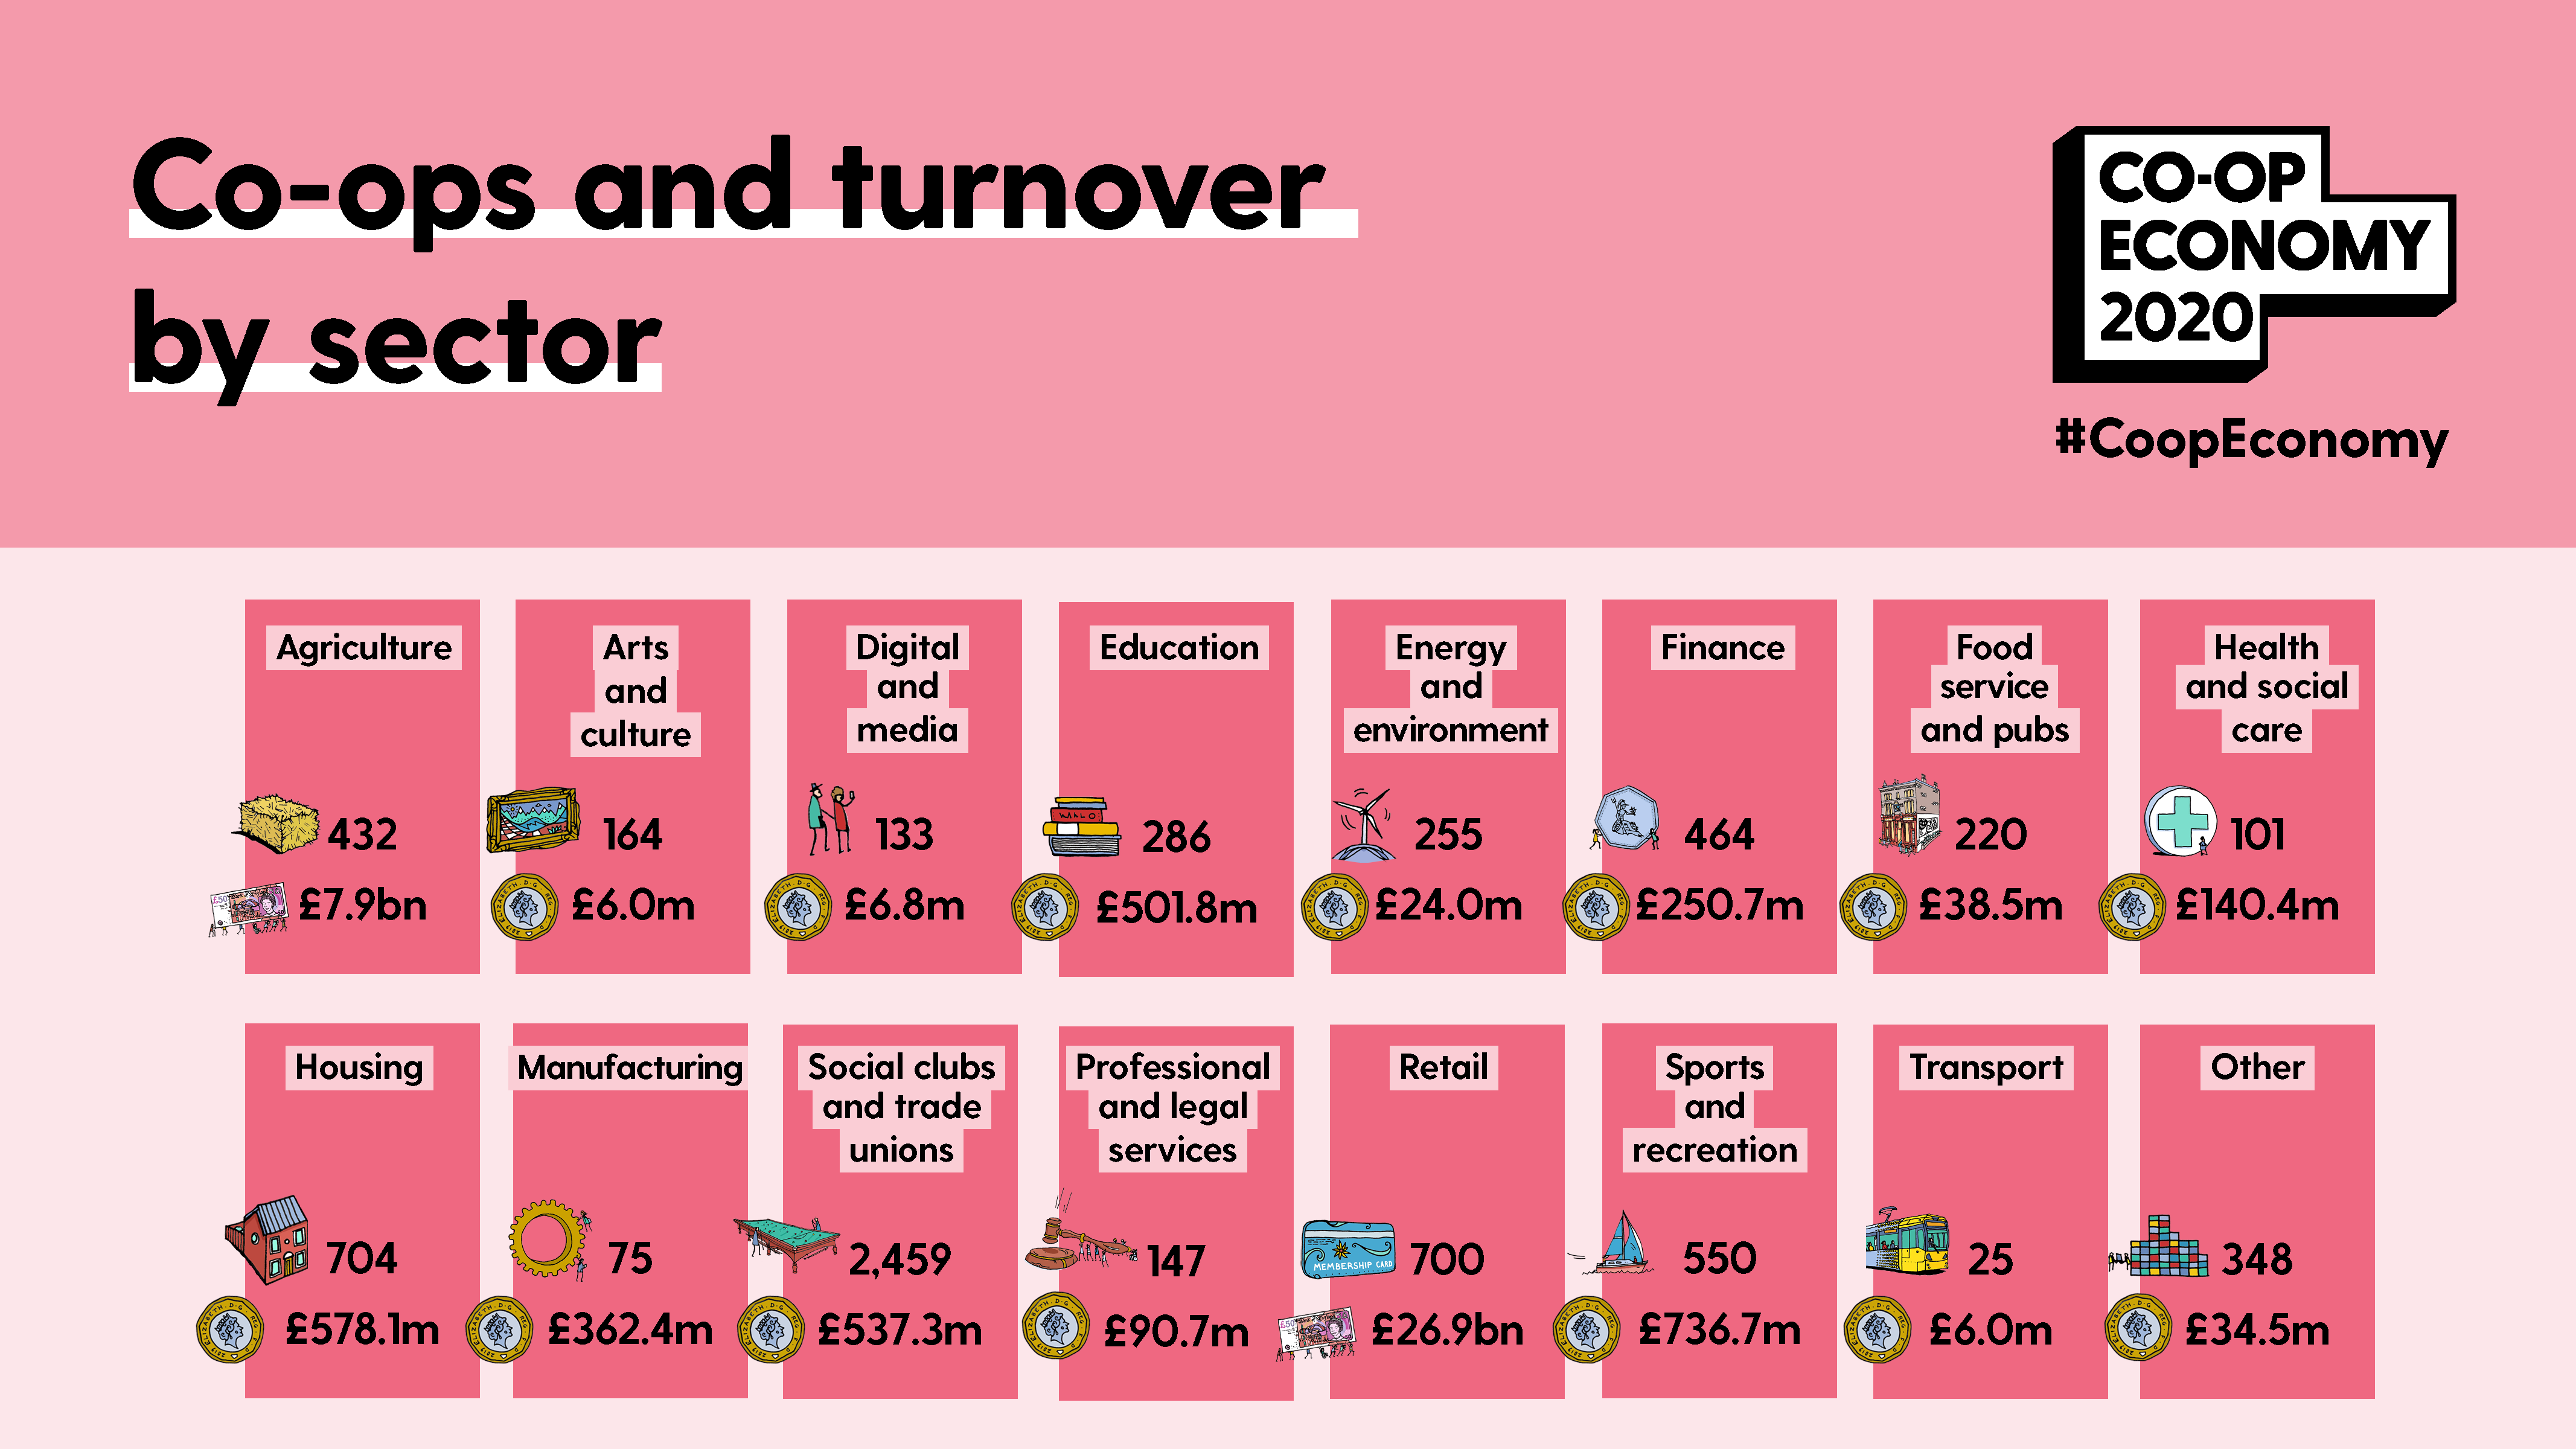 Co-ops by sector and turnover